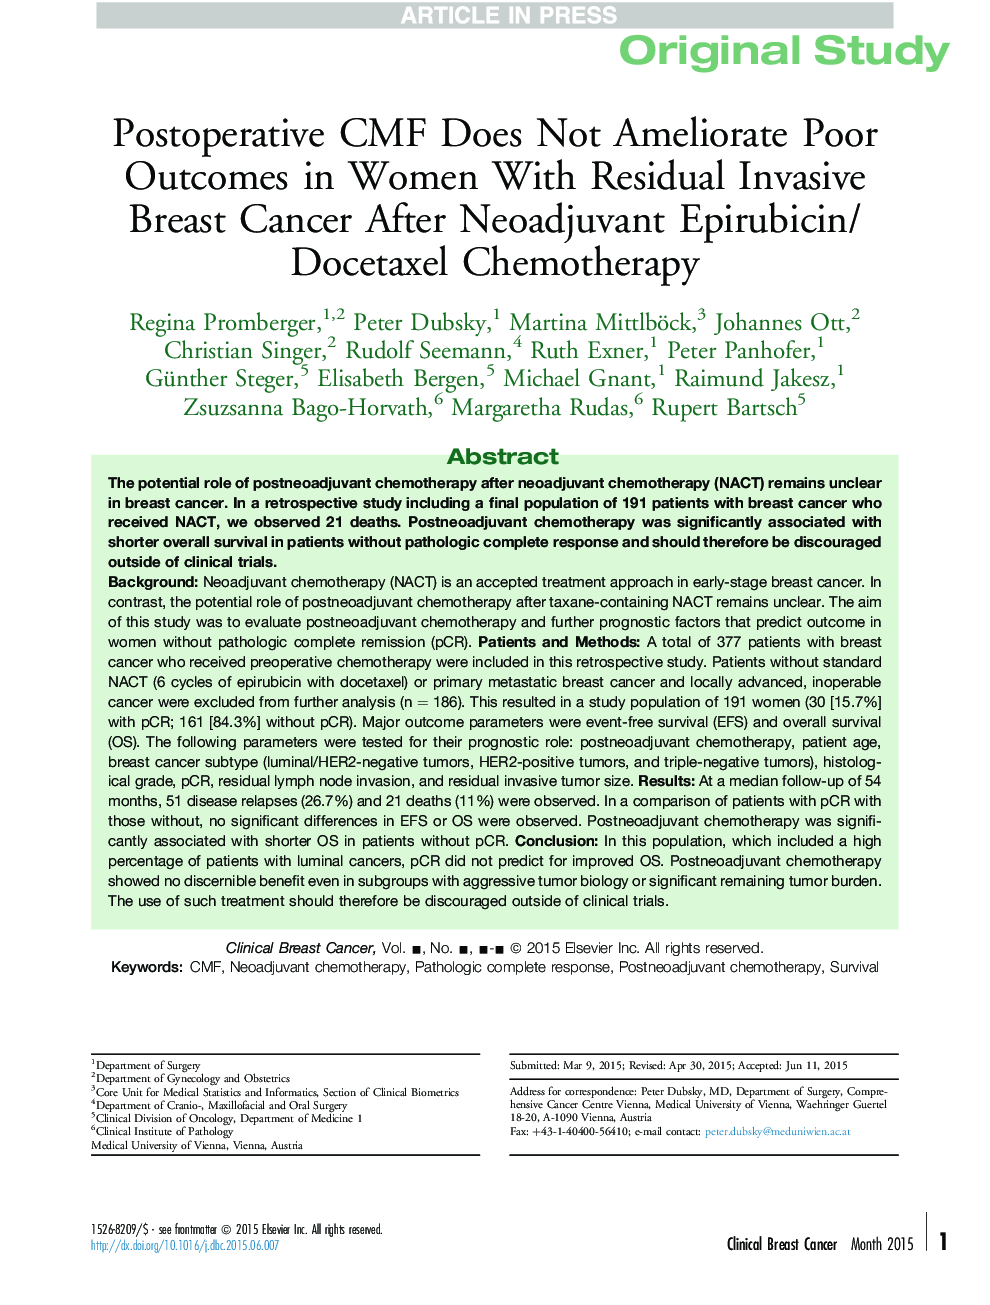 Postoperative CMF Does Not Ameliorate Poor Outcomes in Women With Residual Invasive Breast Cancer After Neoadjuvant Epirubicin/Docetaxel Chemotherapy